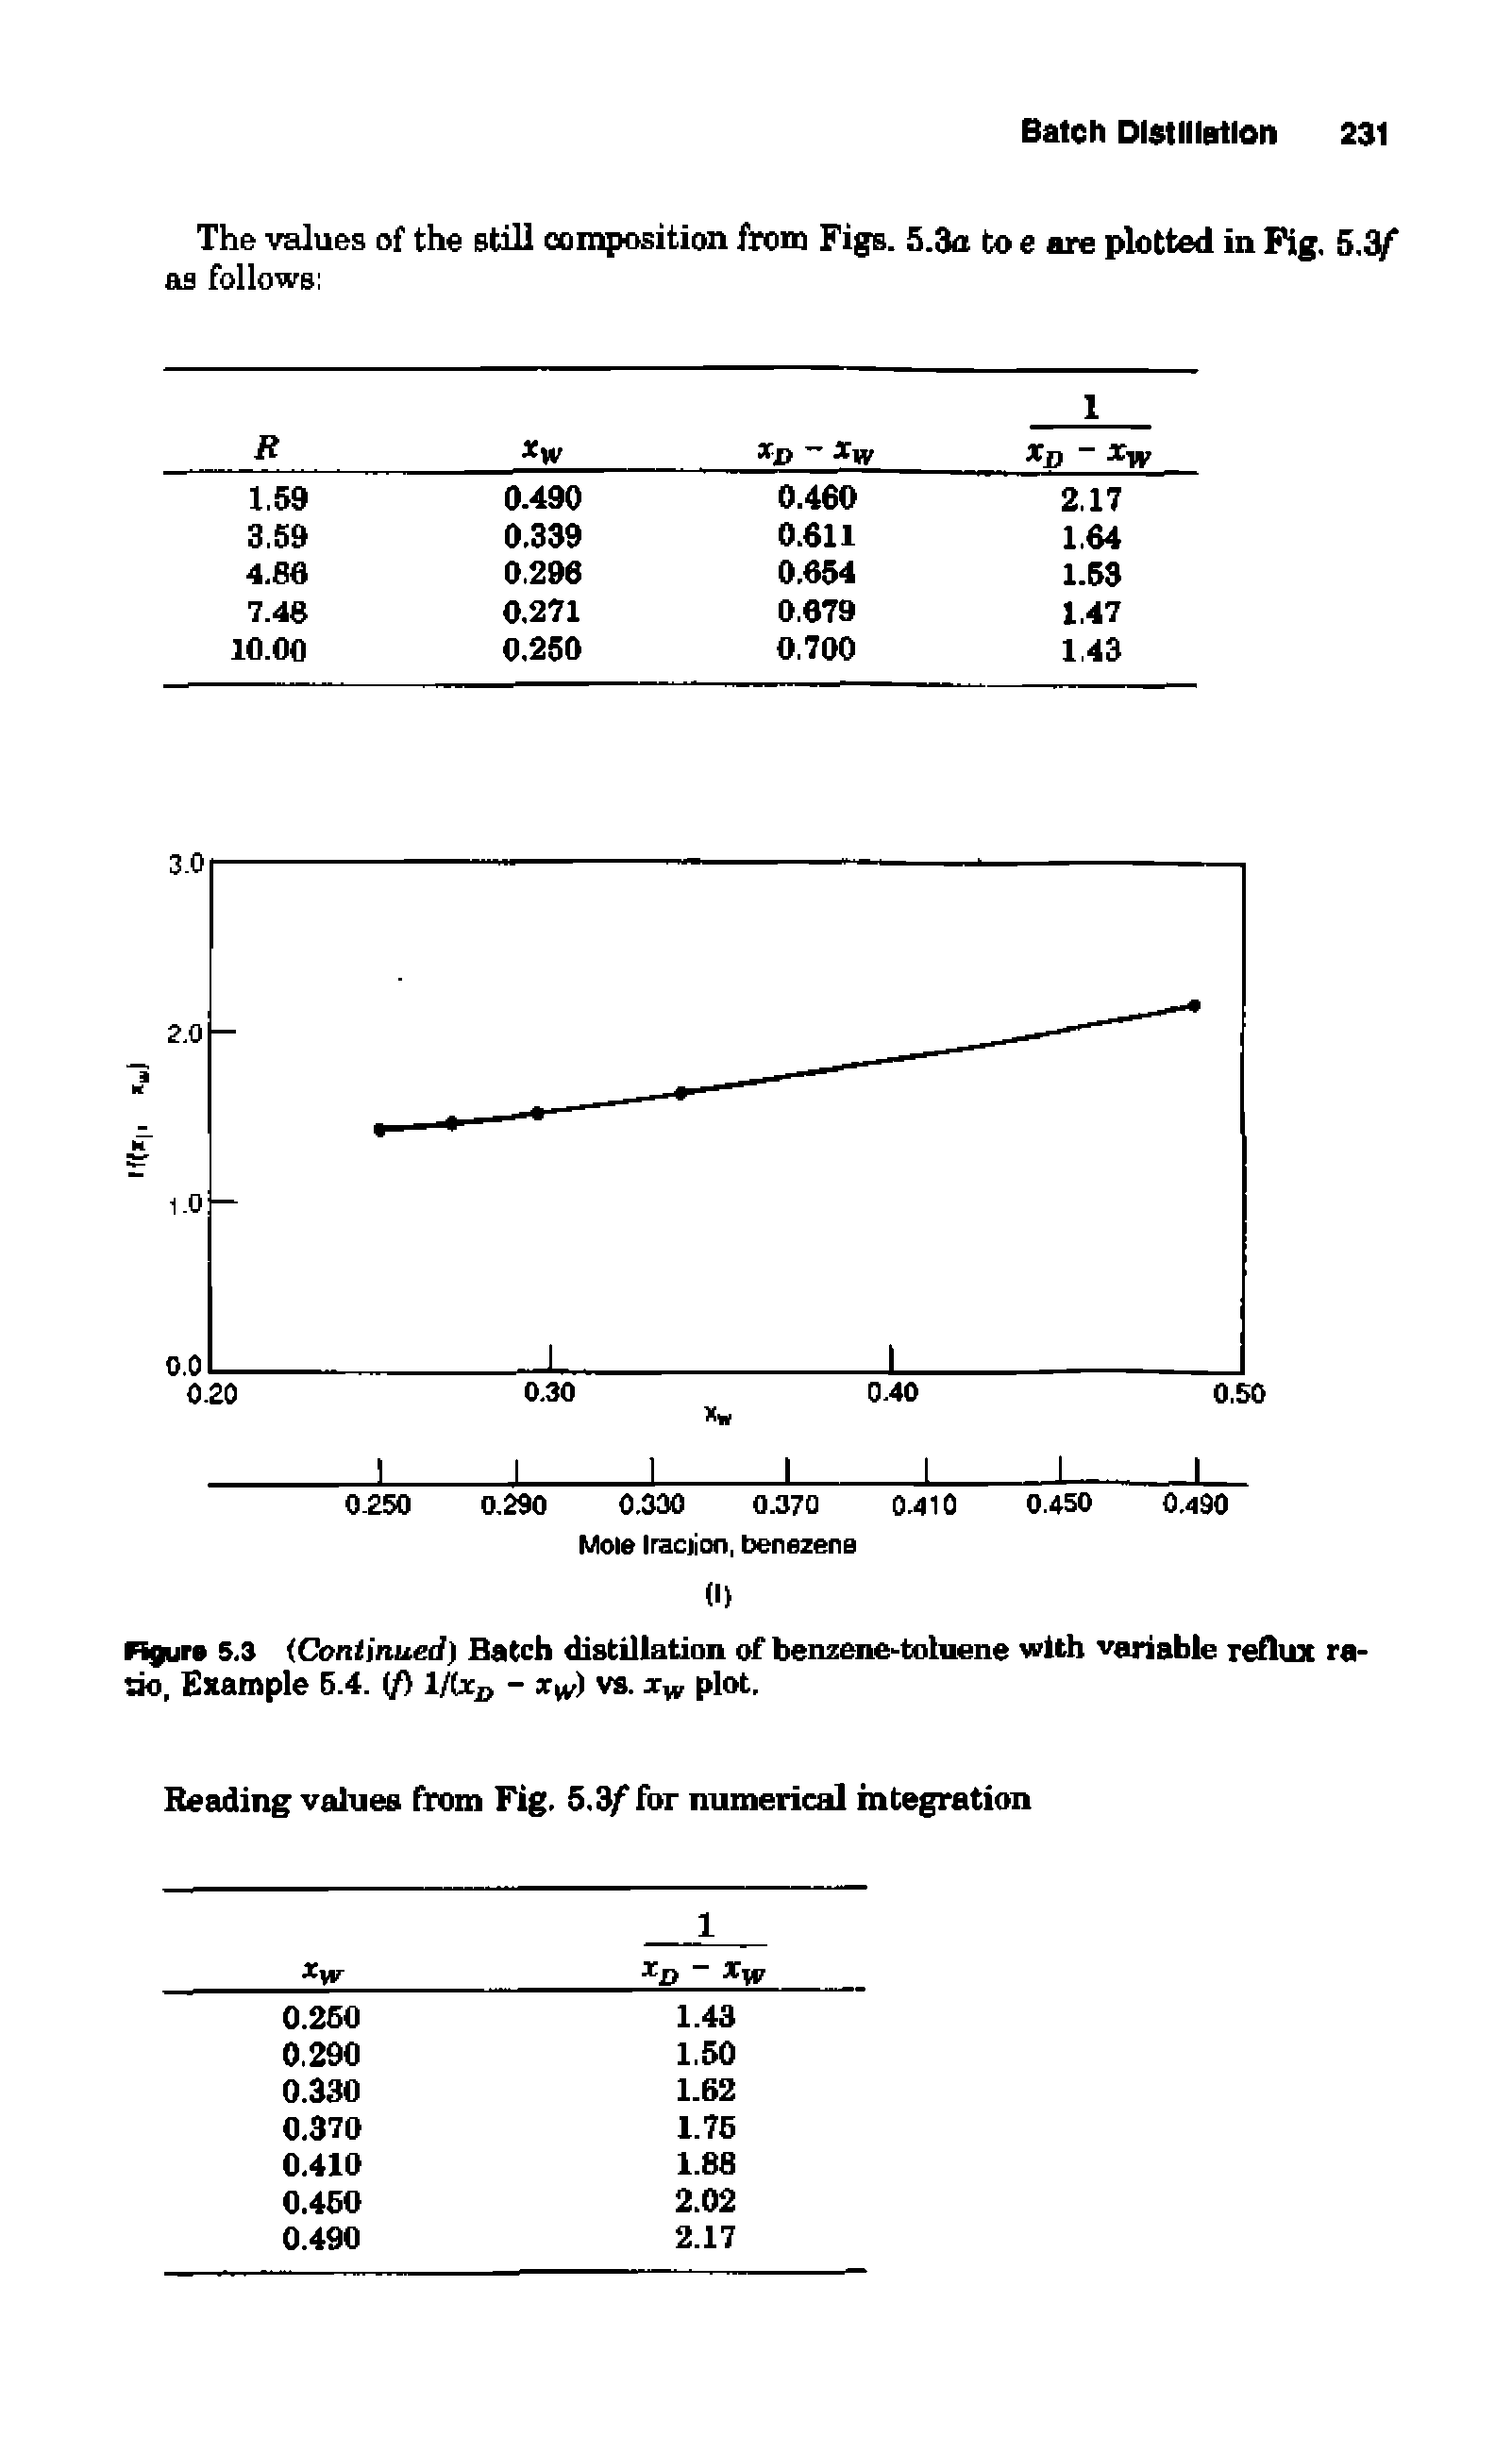 Figure 5.3 (Continued) Batch distillation of benzene tohiene with variable reflux ratio, Example 5.4. if) l/(xD - xw) vs. xw plot.